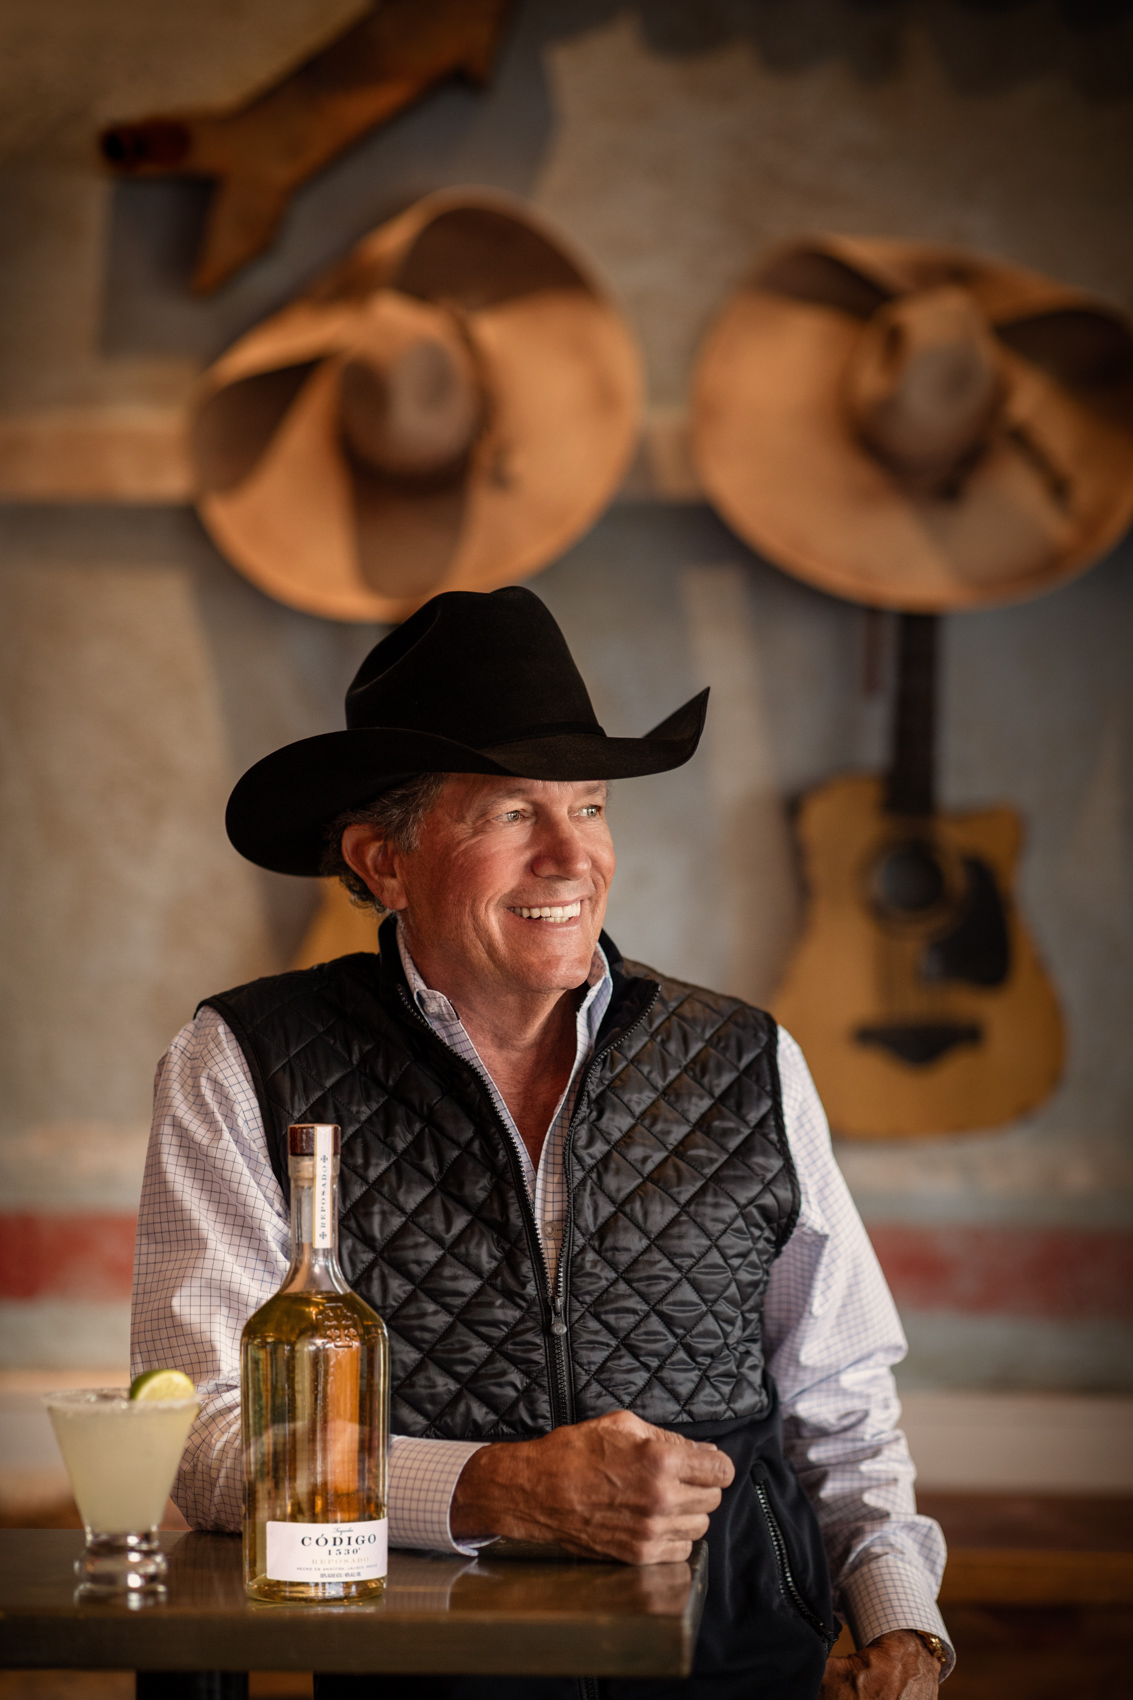 country singer george strait looking off camera with guitars and hats in background